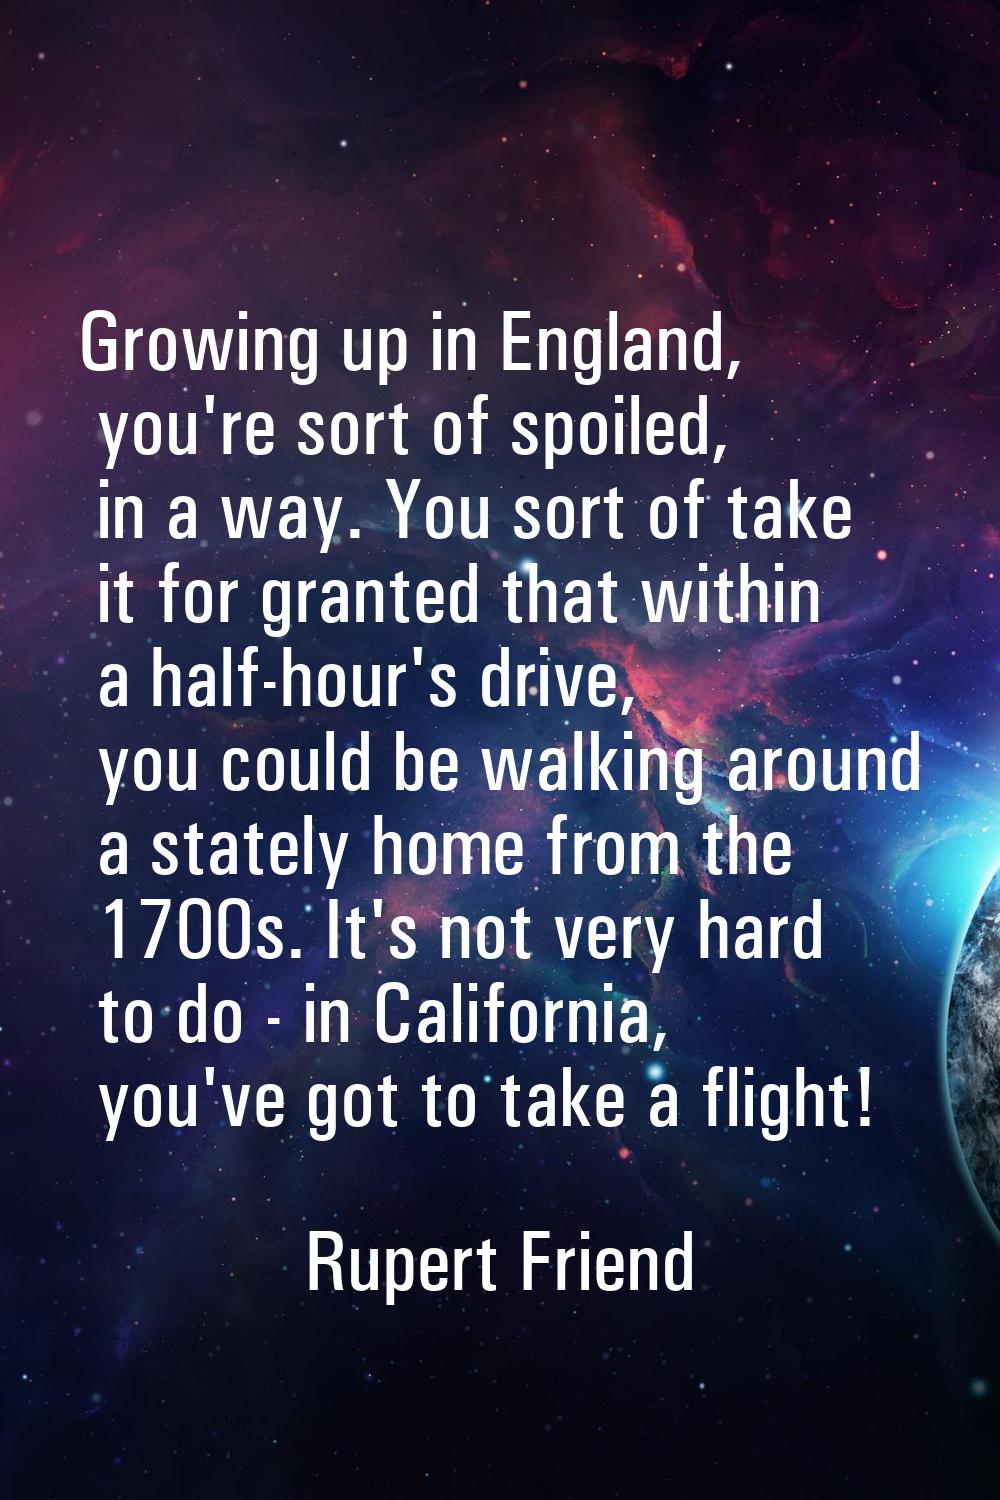 Growing up in England, you're sort of spoiled, in a way. You sort of take it for granted that withi